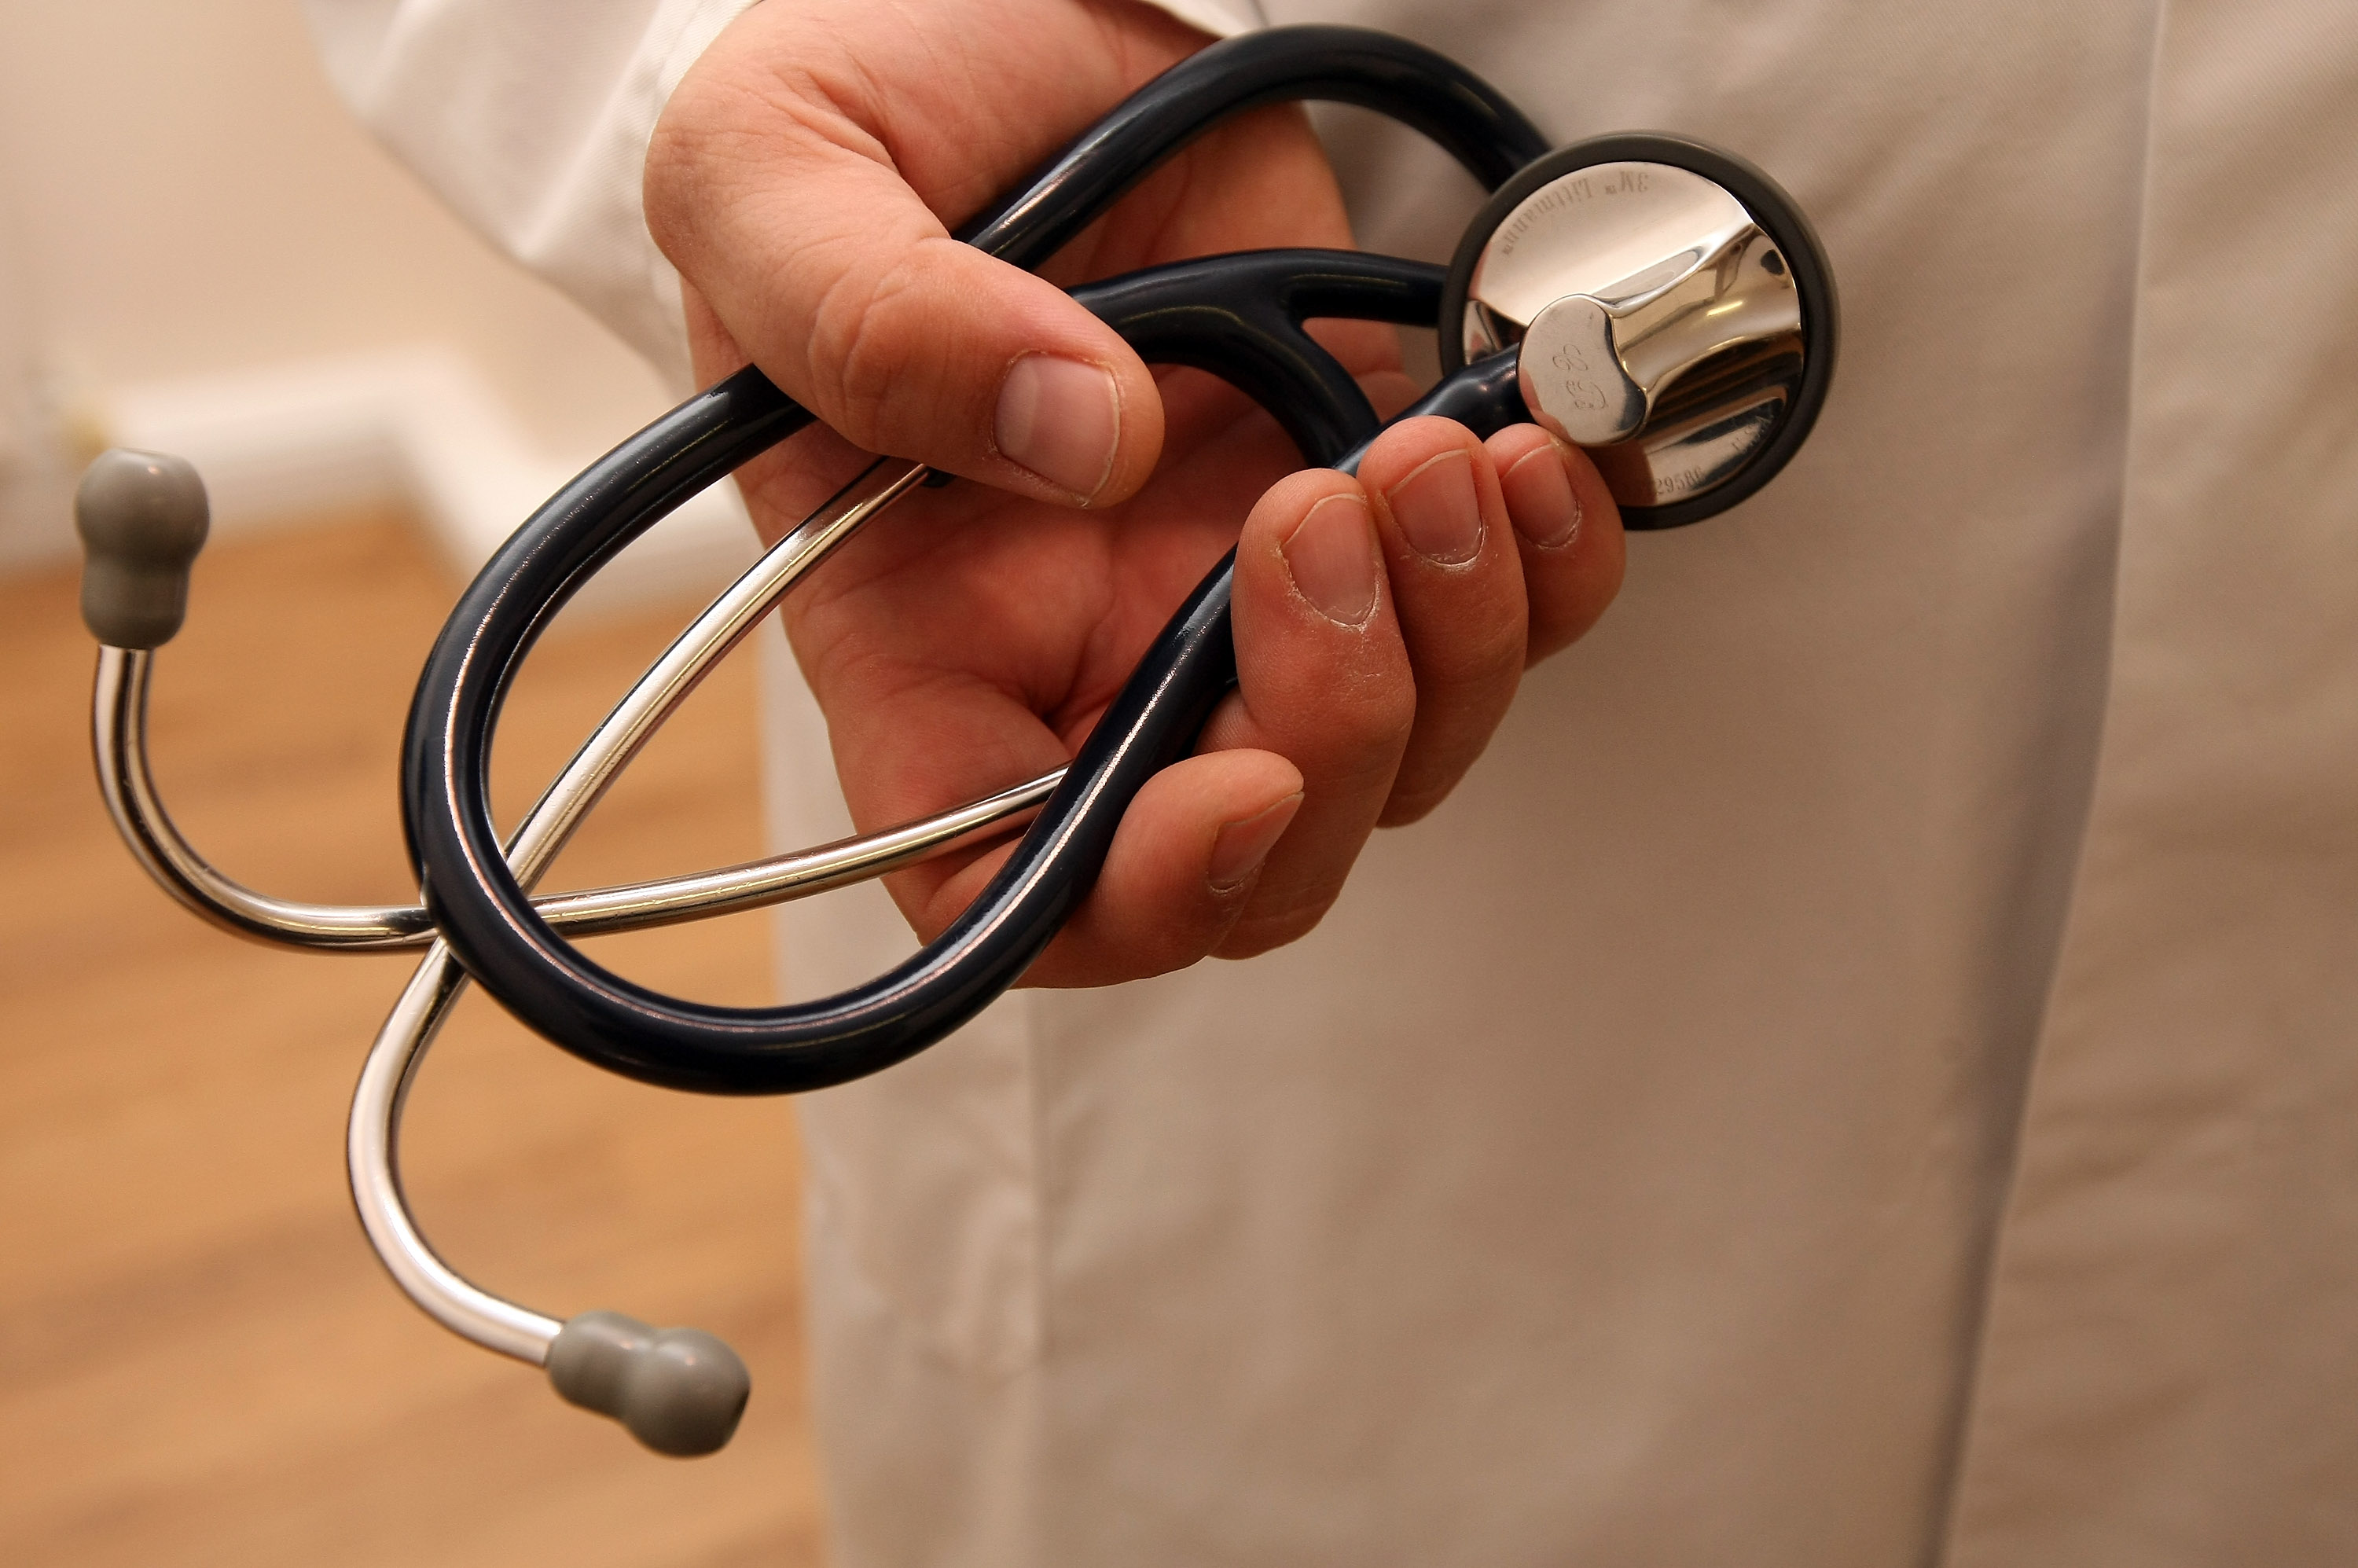 A doctor holds a stethoscope on September 5, 2012 in Berlin, Germany. (Adam Berry—Getty Images)